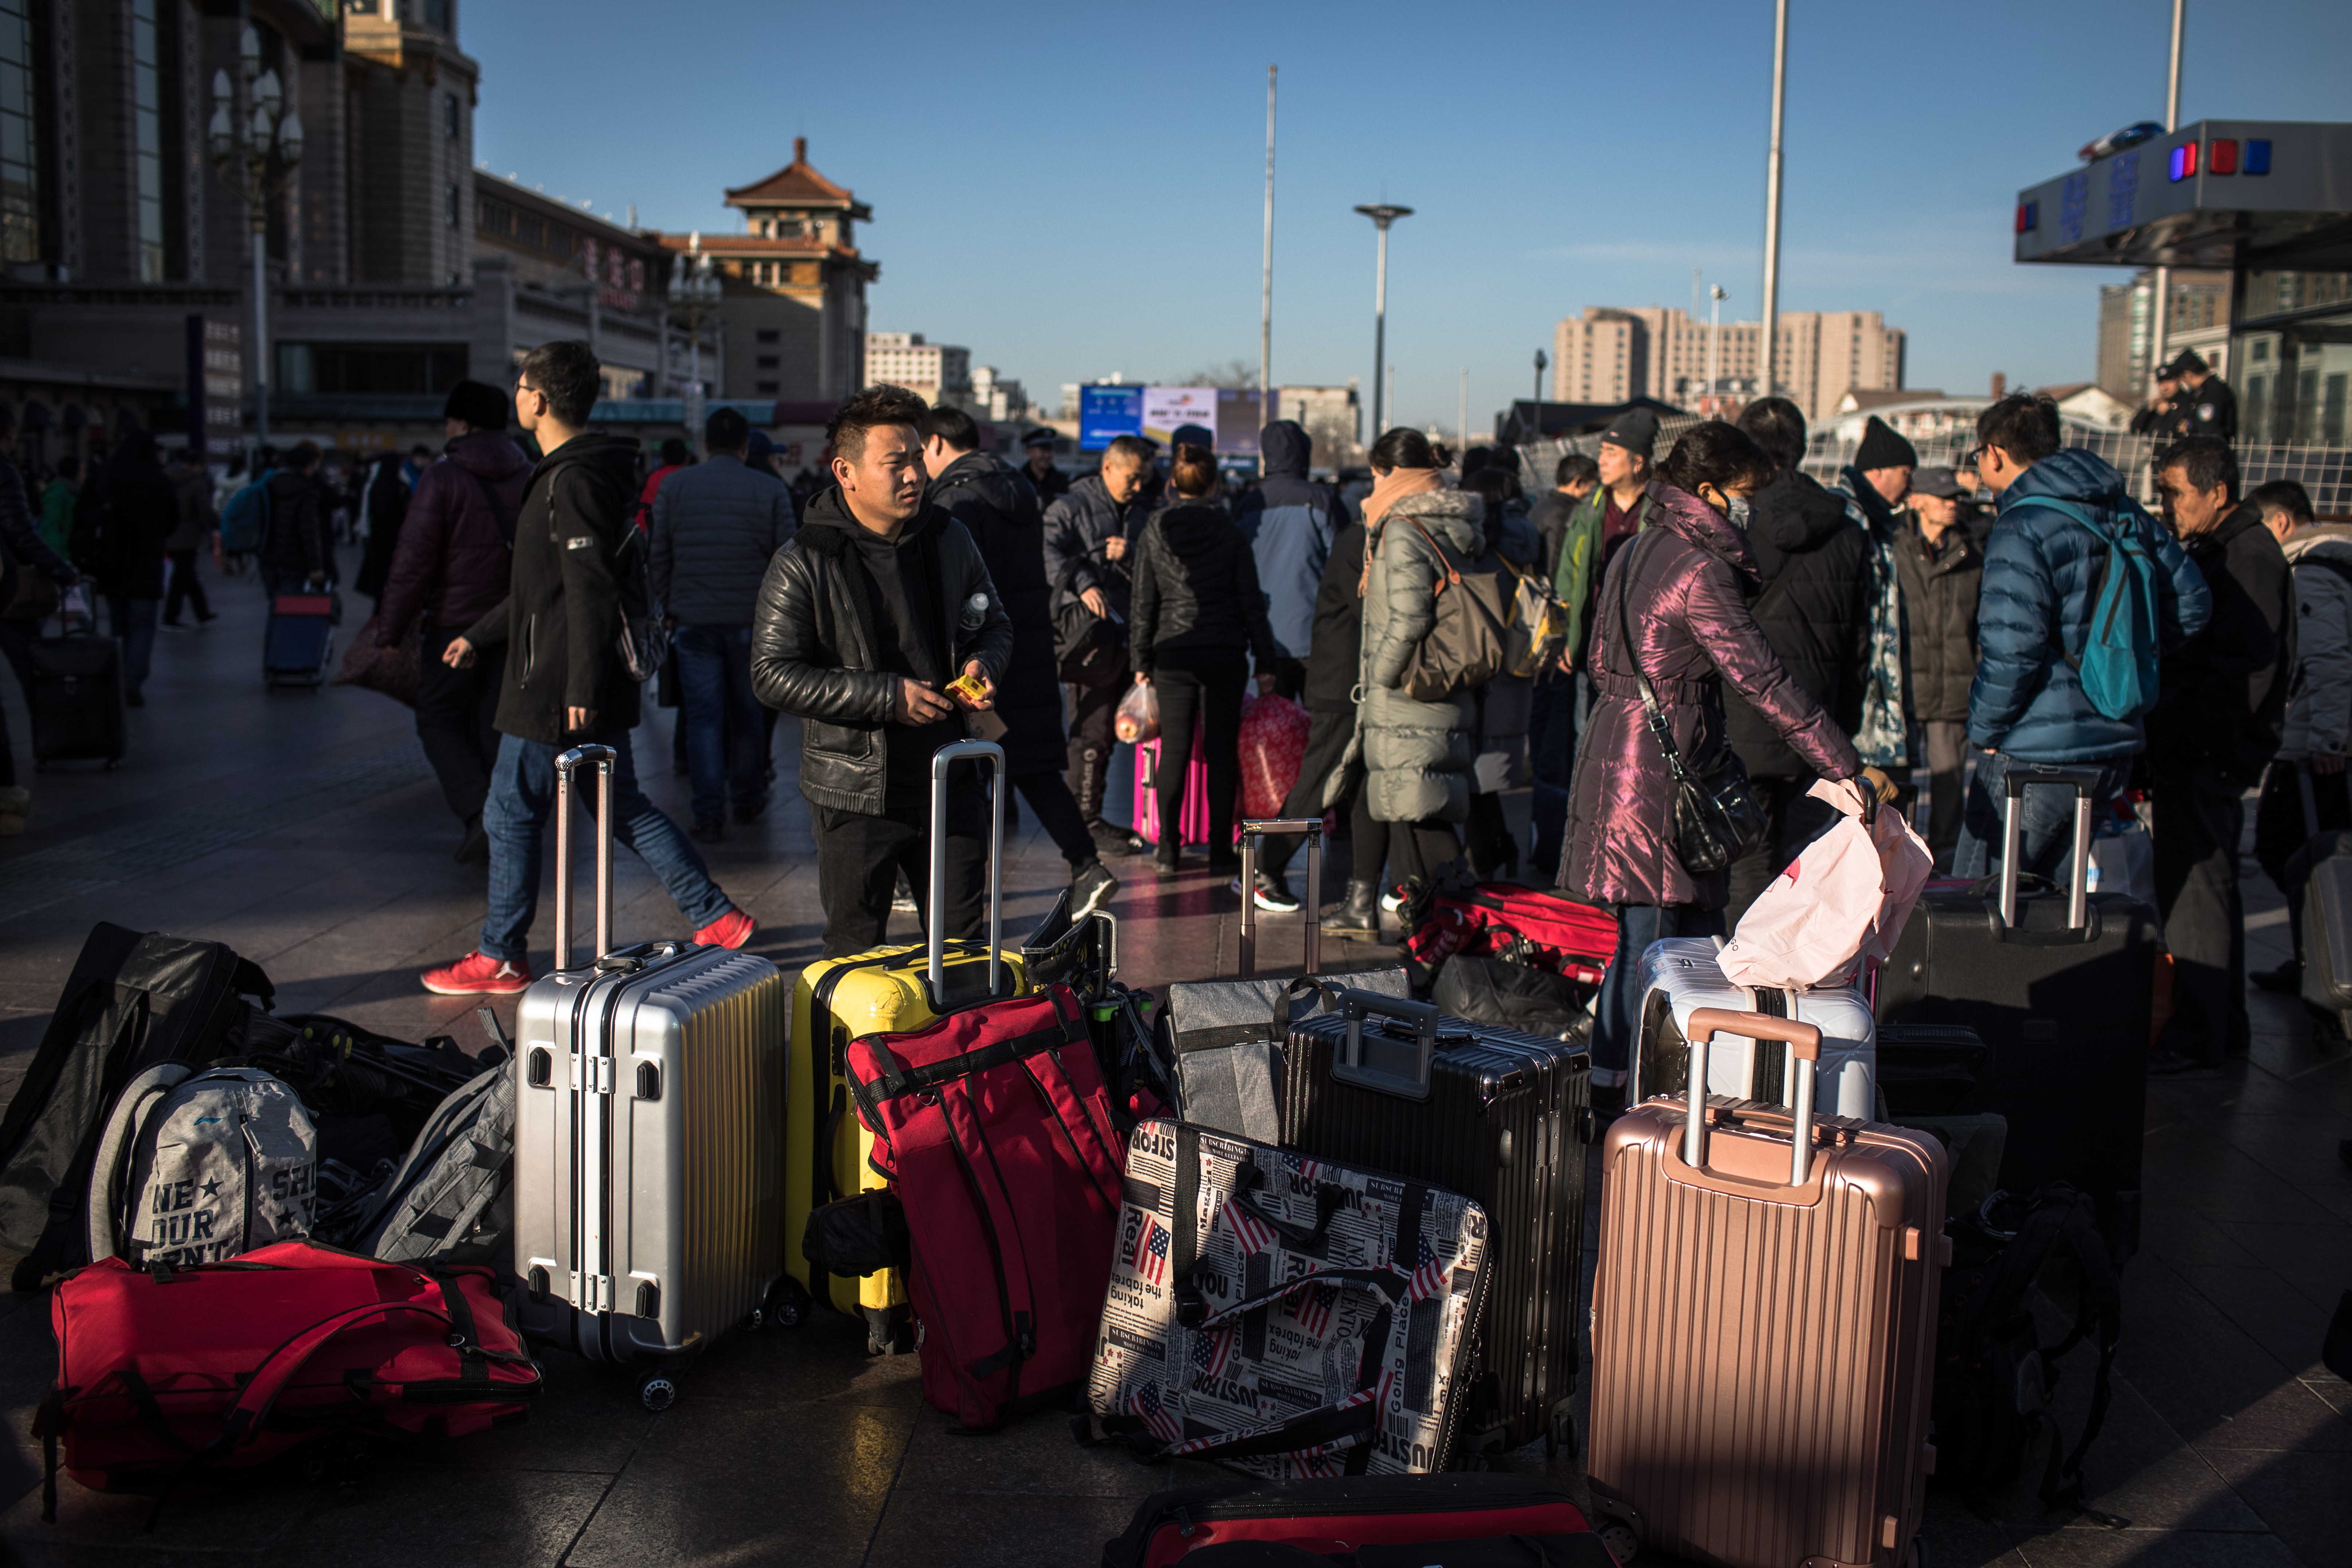 Passengers at Beijing railway station get ready for the journey ahead on Monday. Photo: EPA